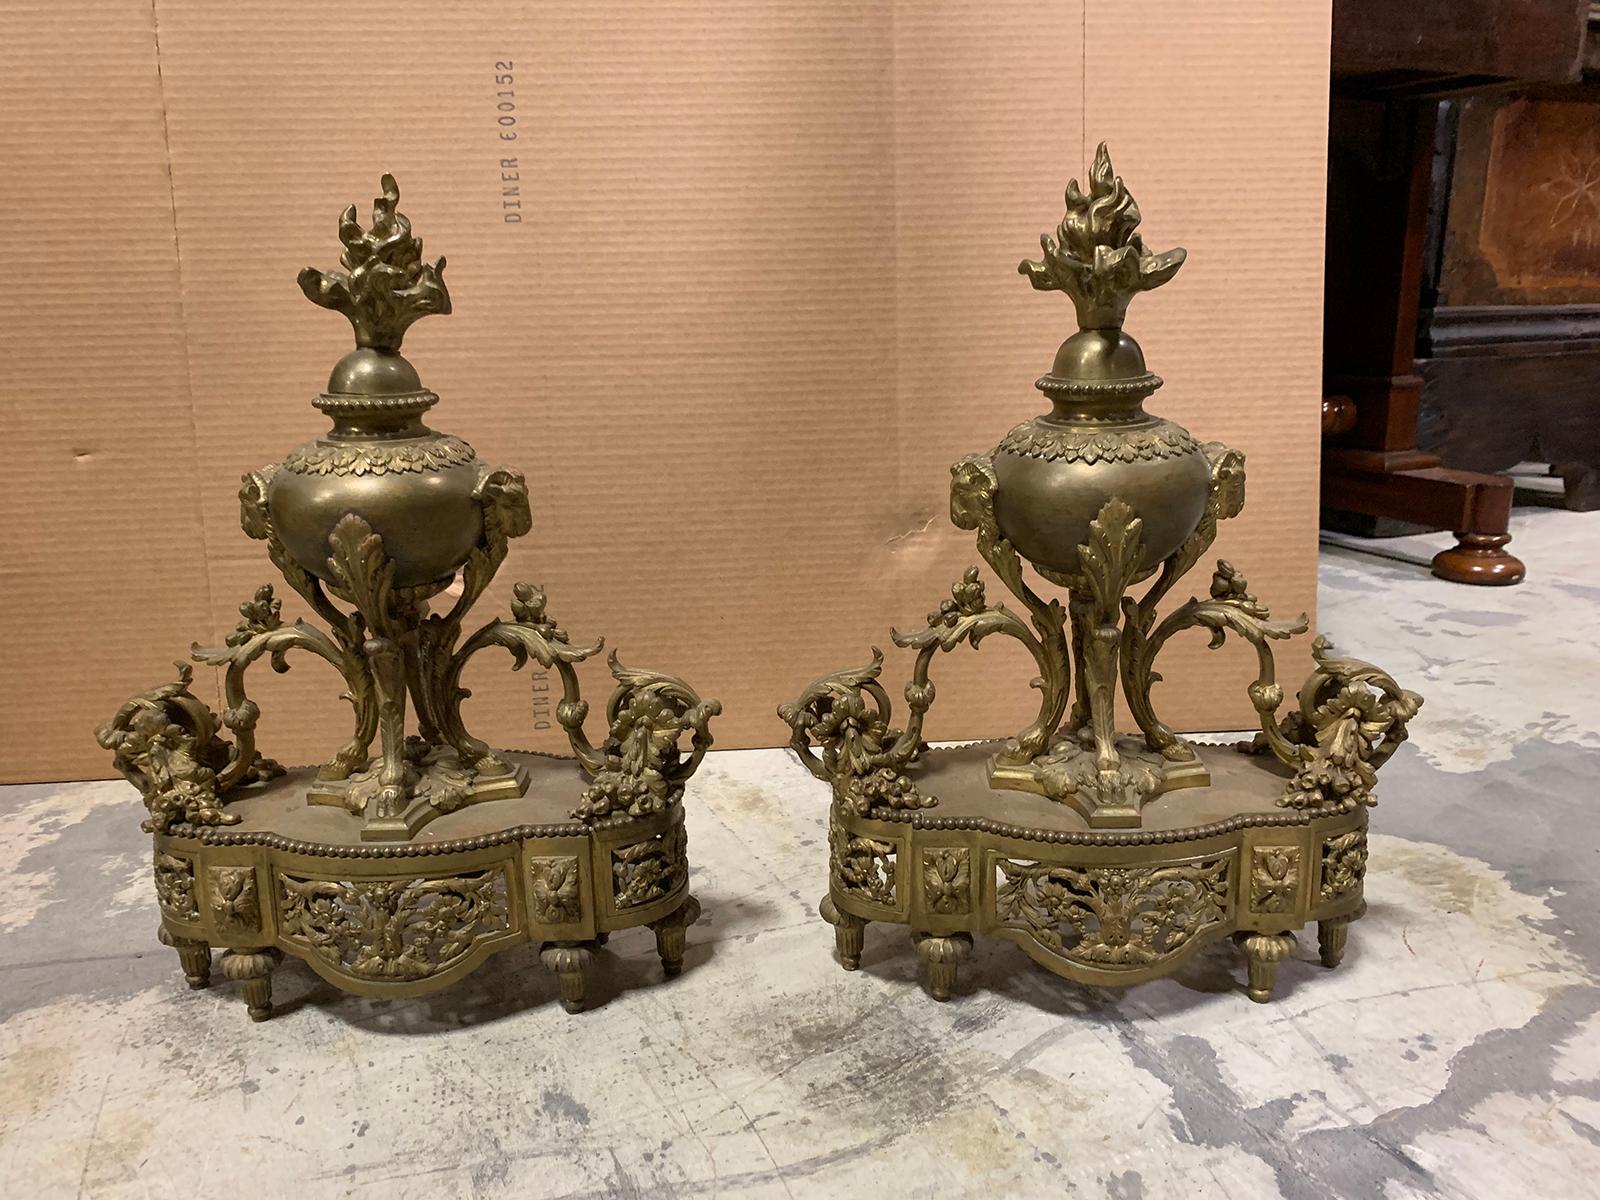 Pair of 19th century French bronze fireplace chenets.